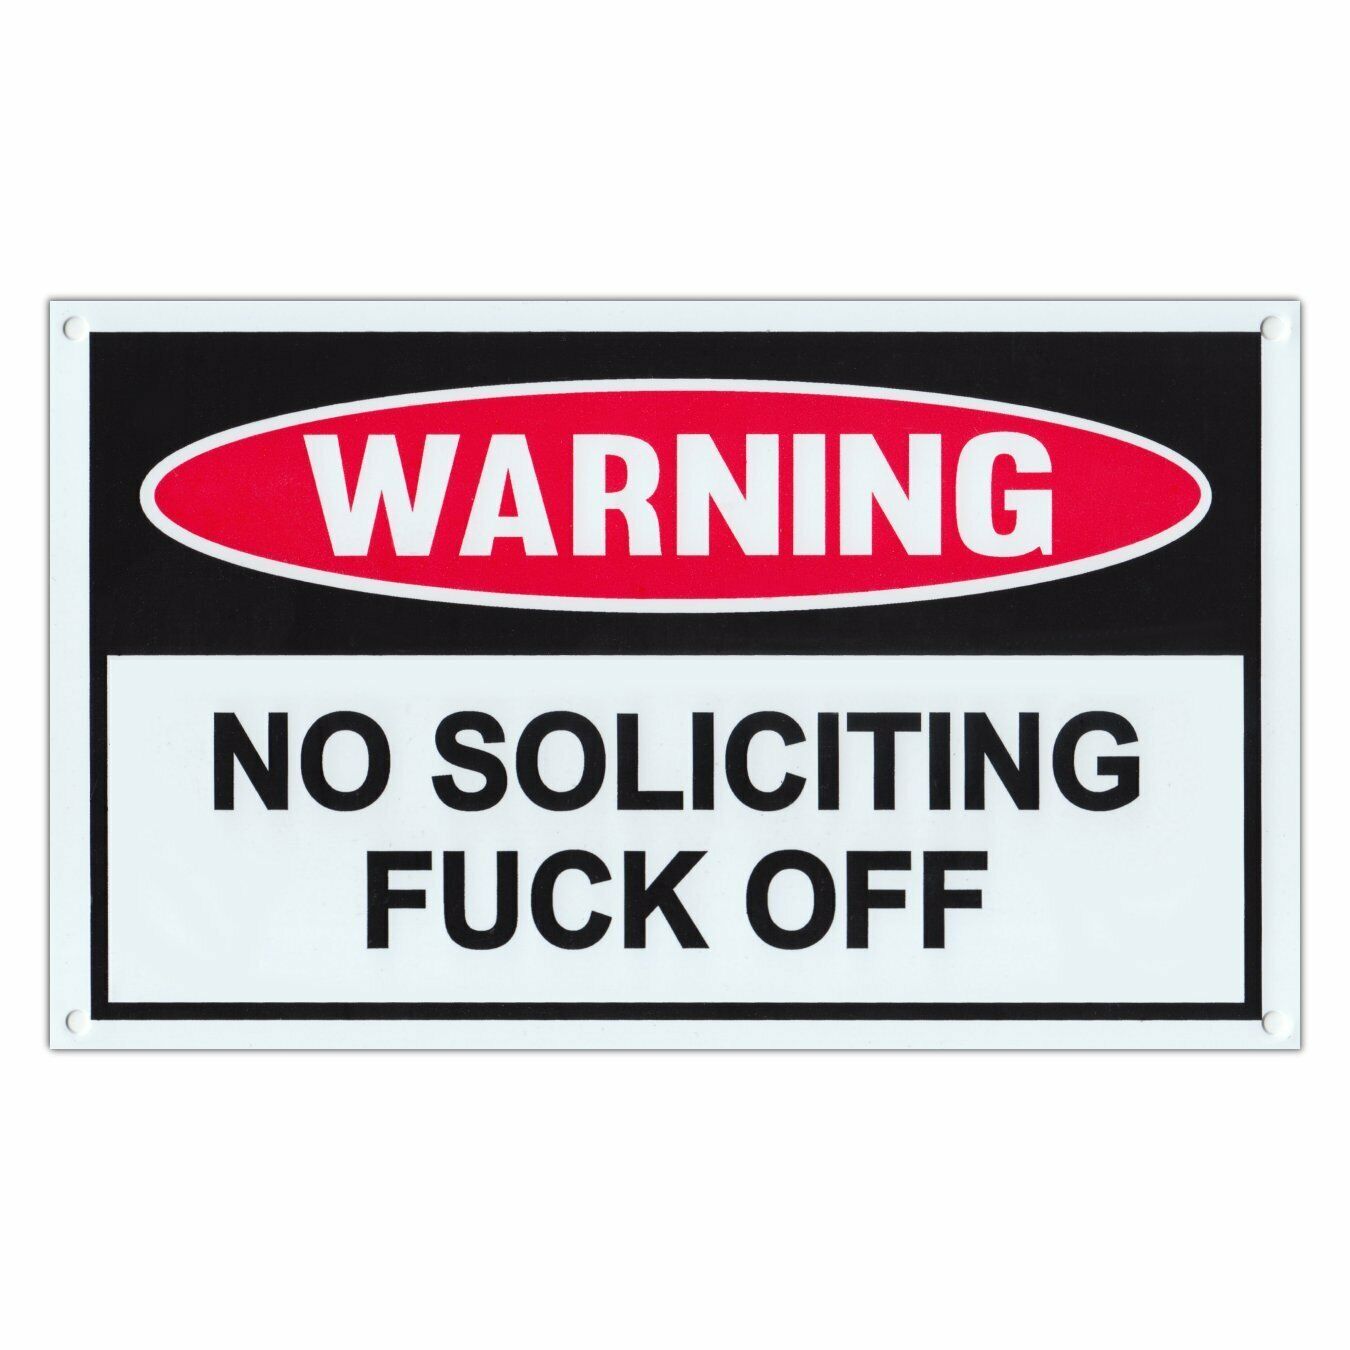 Funny Warning Sign, Plastic, No Soliciting, F*** Off, 10